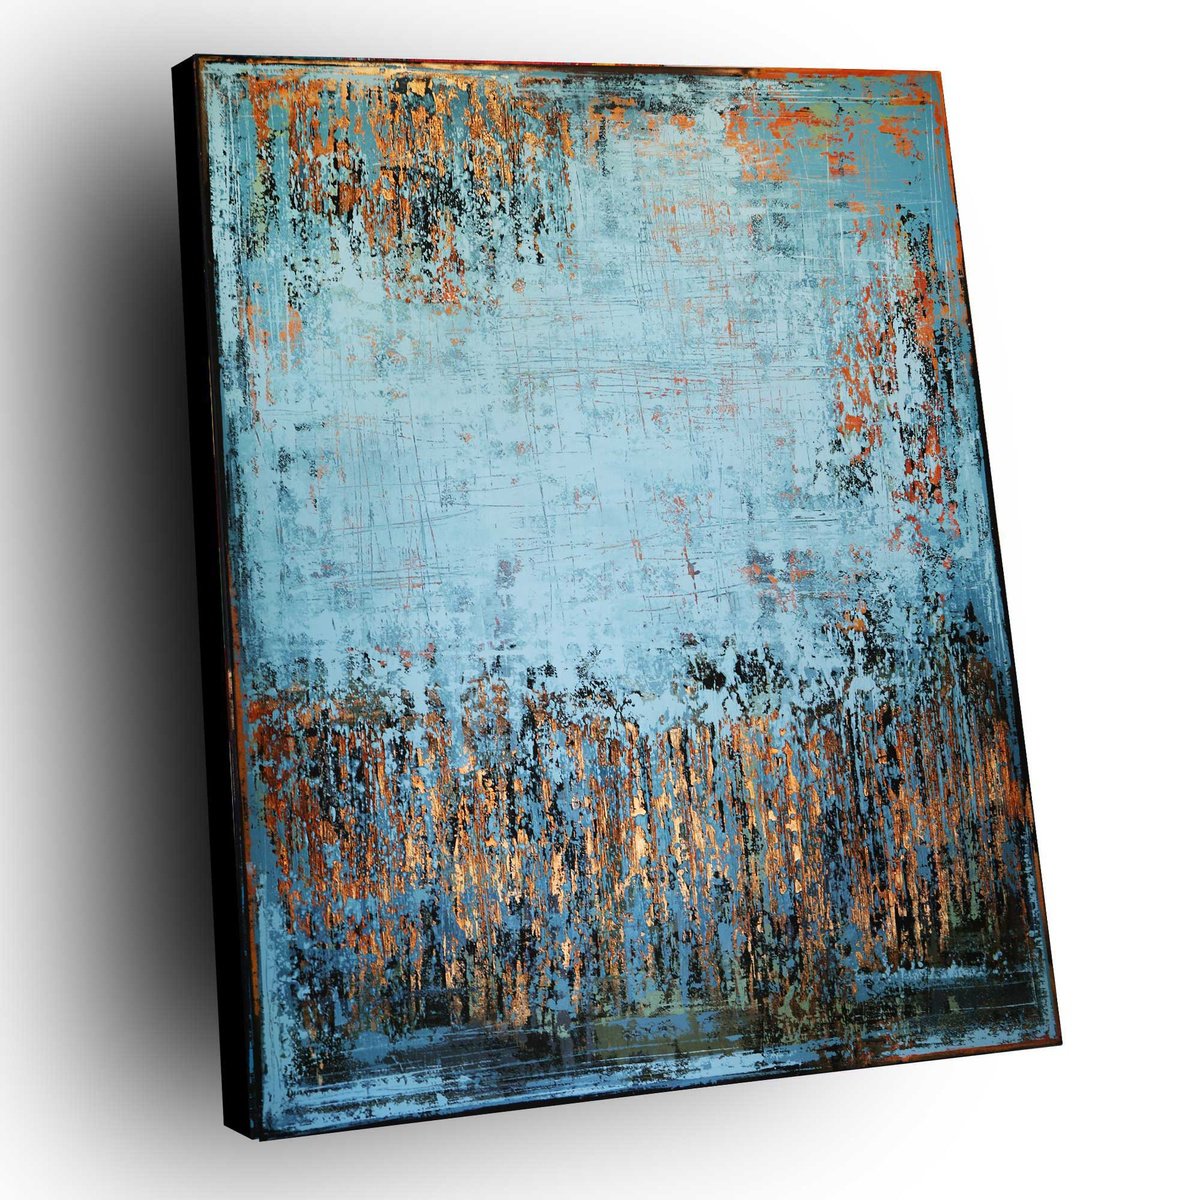 COOLING DOWN - 150 x 120 CM - TEXTURED ACRYLIC PAINTING ON CANVAS * BLUE * GOLD by Inez Froehlich